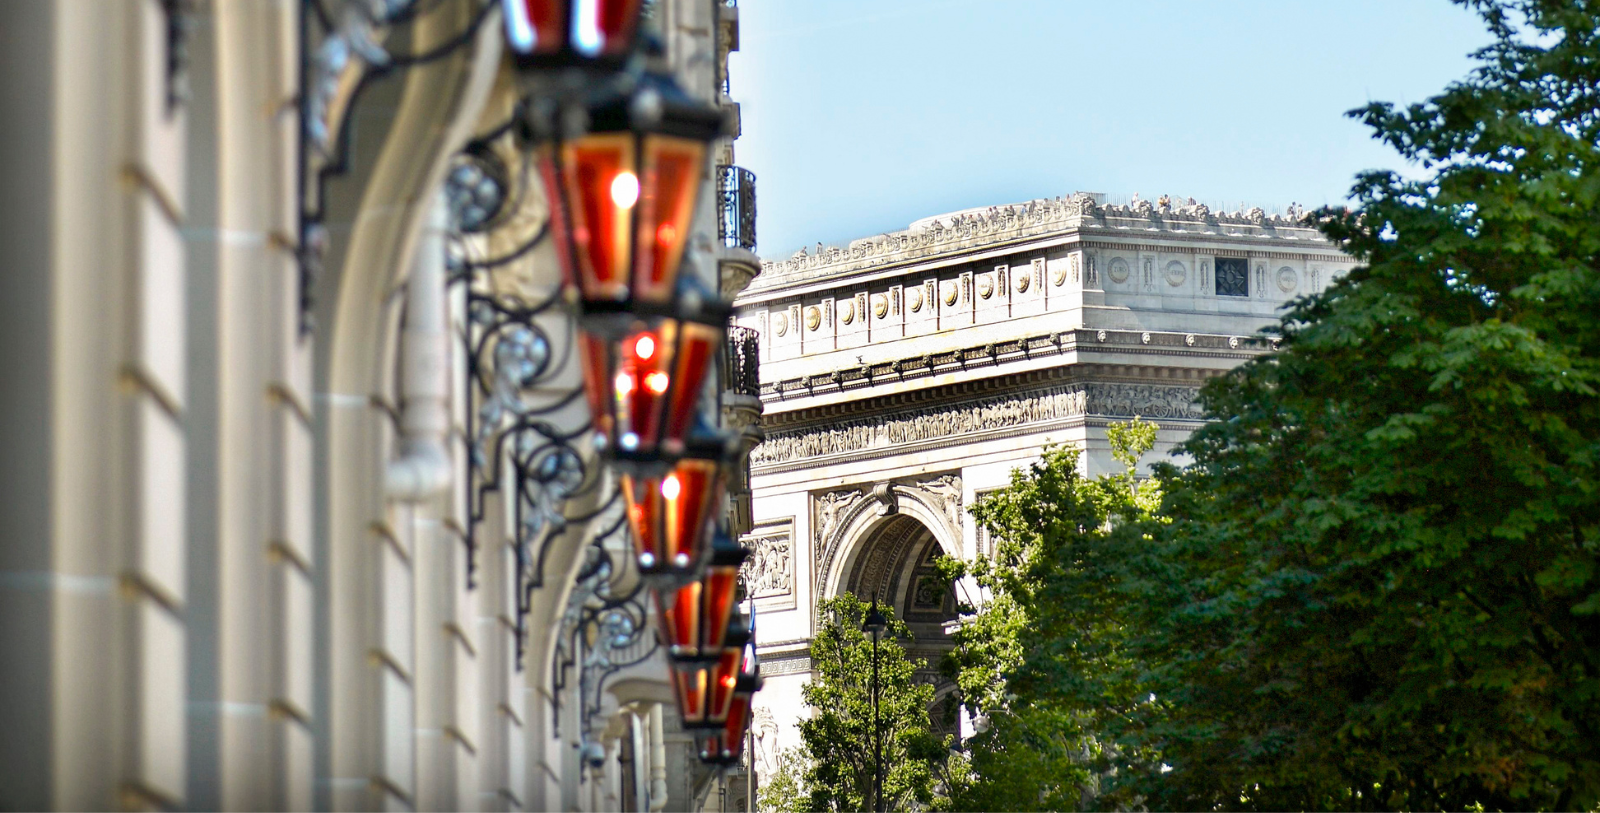 Explore the bustling 8th arrondissement, the chic and storied neighborhood home to Le Royal Monceau - Raffles Paris, as well as must-see sites like the Avenue des Champs-Élysées and one-third of the Arc de Triomphe.